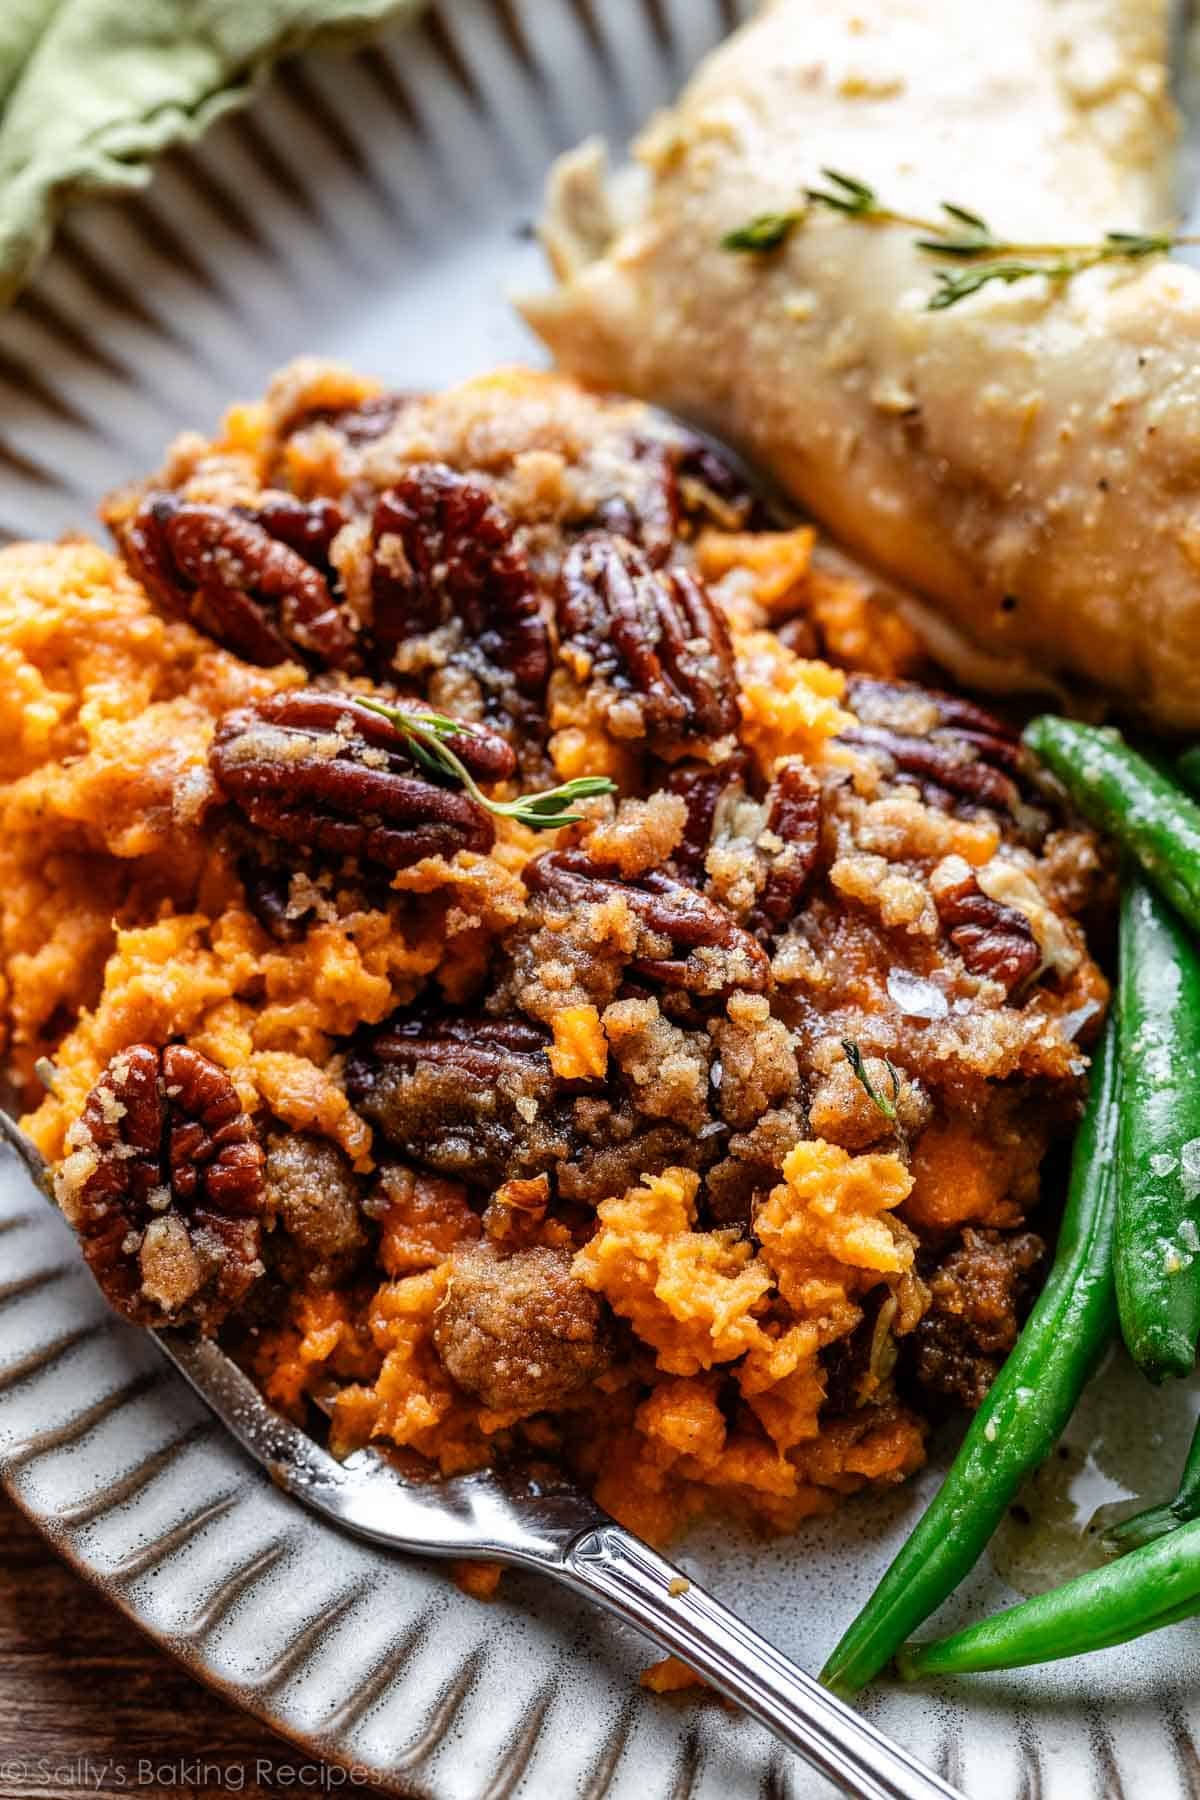 serving of sweet potato casserole on geay plate with turkey and green beans.